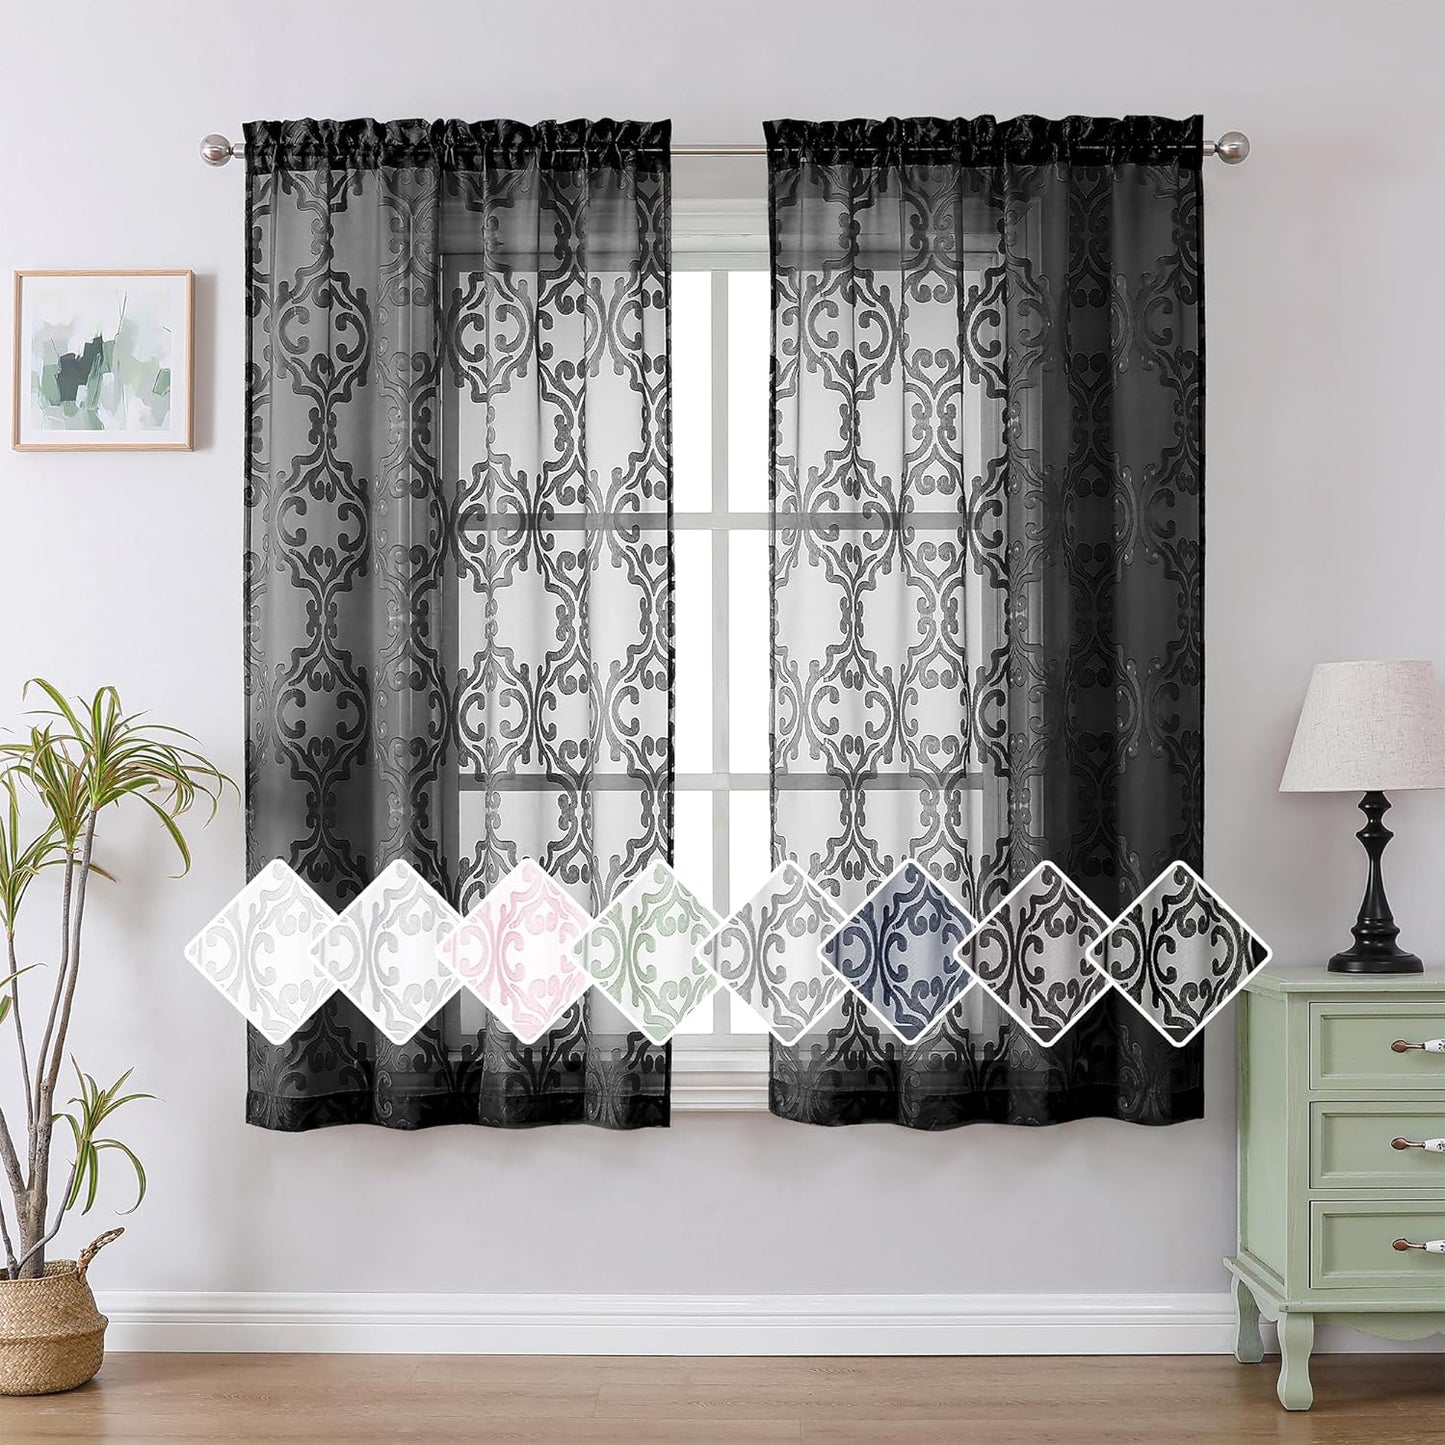 Aiyufeng Suri 2 Panels Sheer Sage Green Curtains 63 Inches Long, Light & Airy Privacy Textured Sheer Drapes, Dual Rod Pocket Voile Clipped Floral Luxury Panels for Bedroom Living Room, 42 X 63 Inch  Aiyufeng Black 2X42X63" 